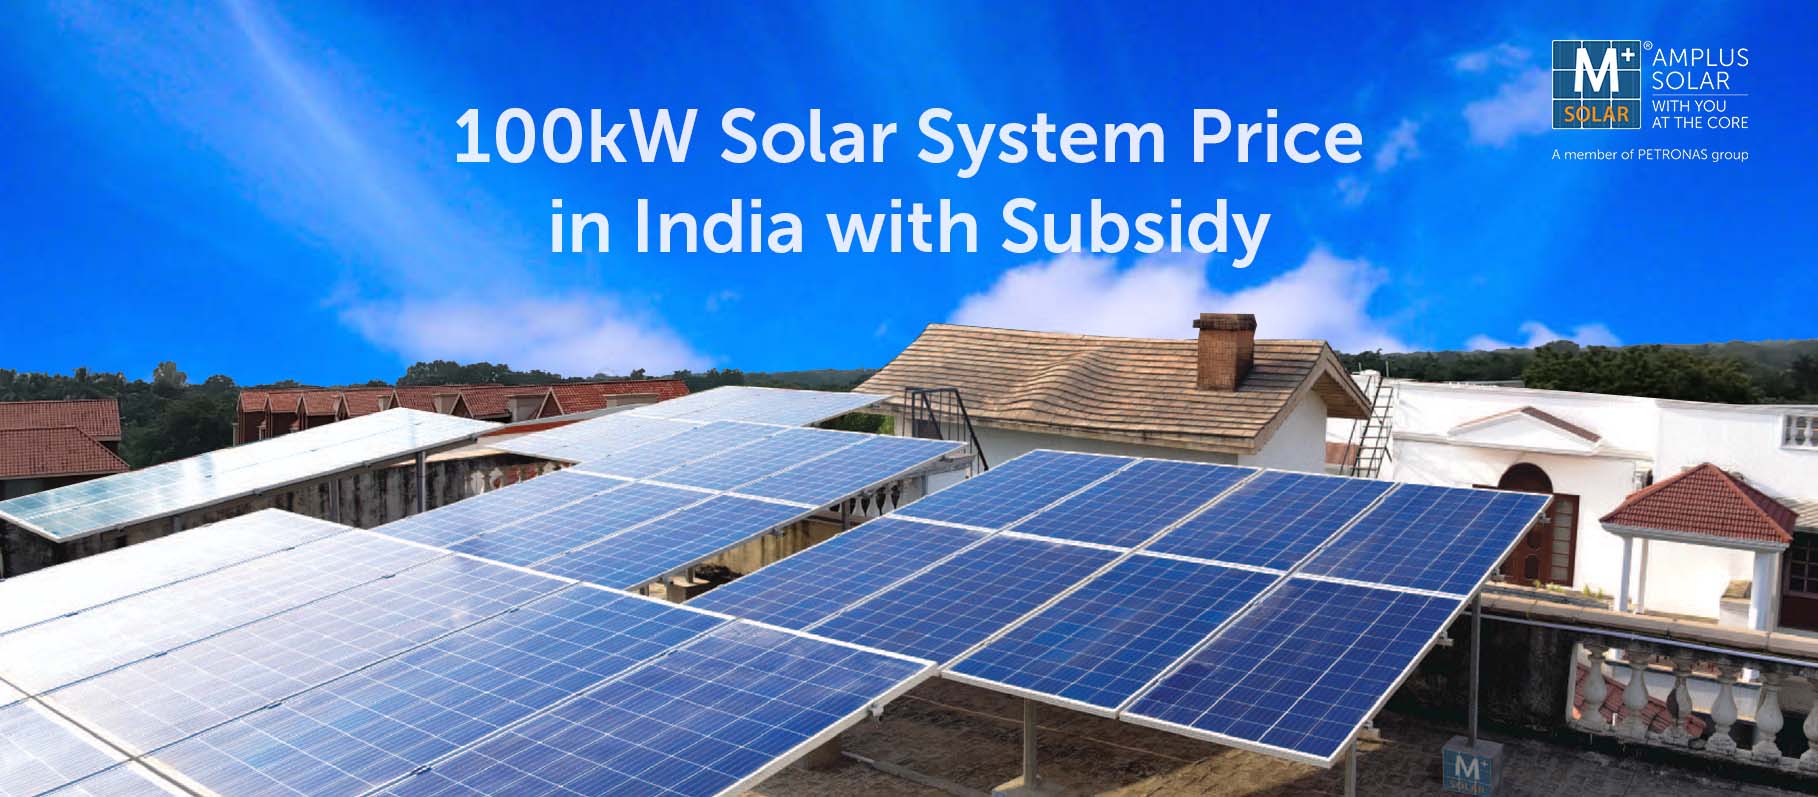 100kW Solar System Price in India with Subsidy